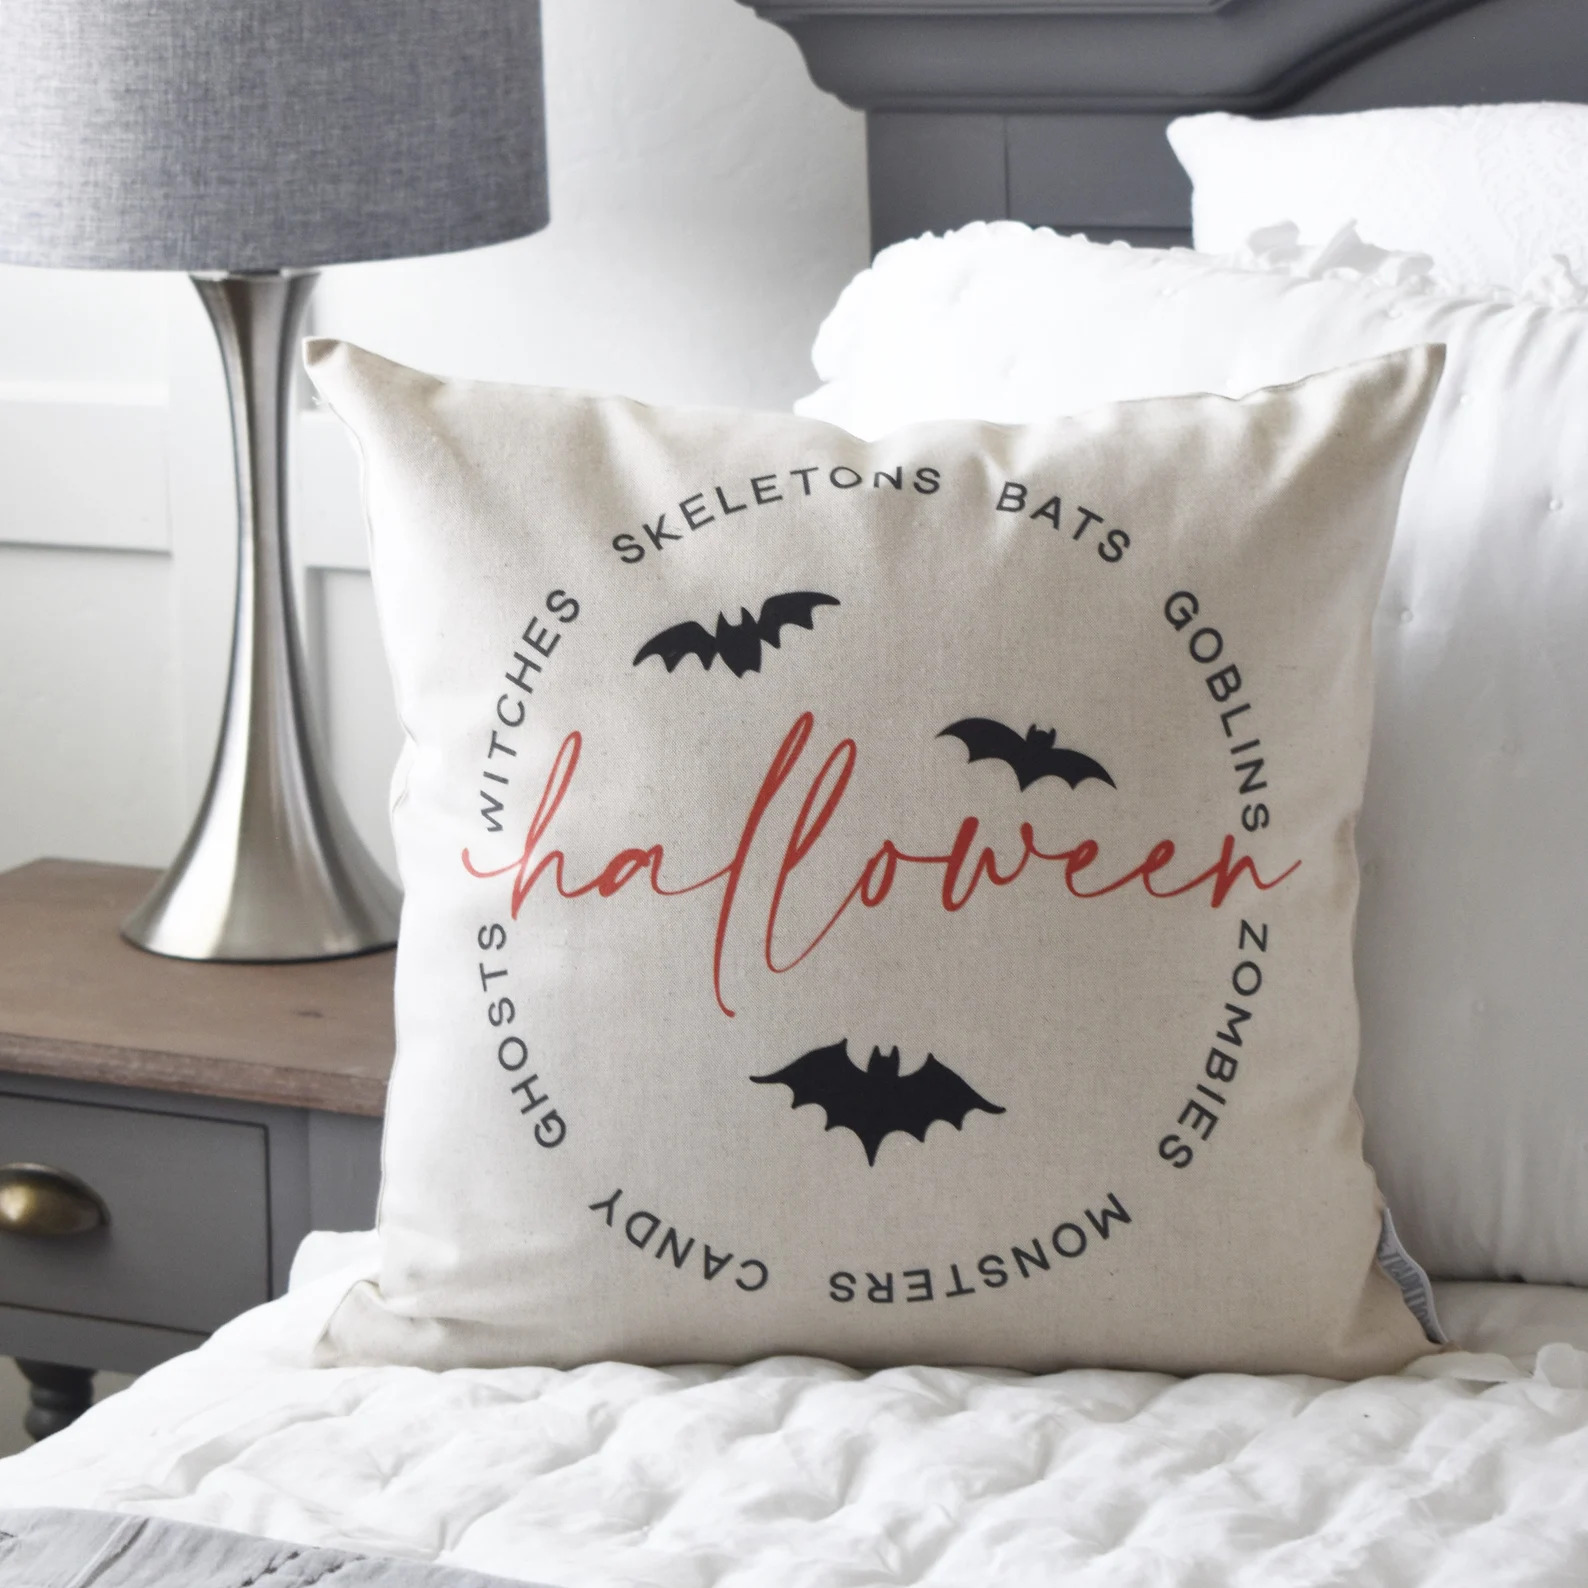 15 Super Spooky Halloween Pillow Designs That You're Going To Adore